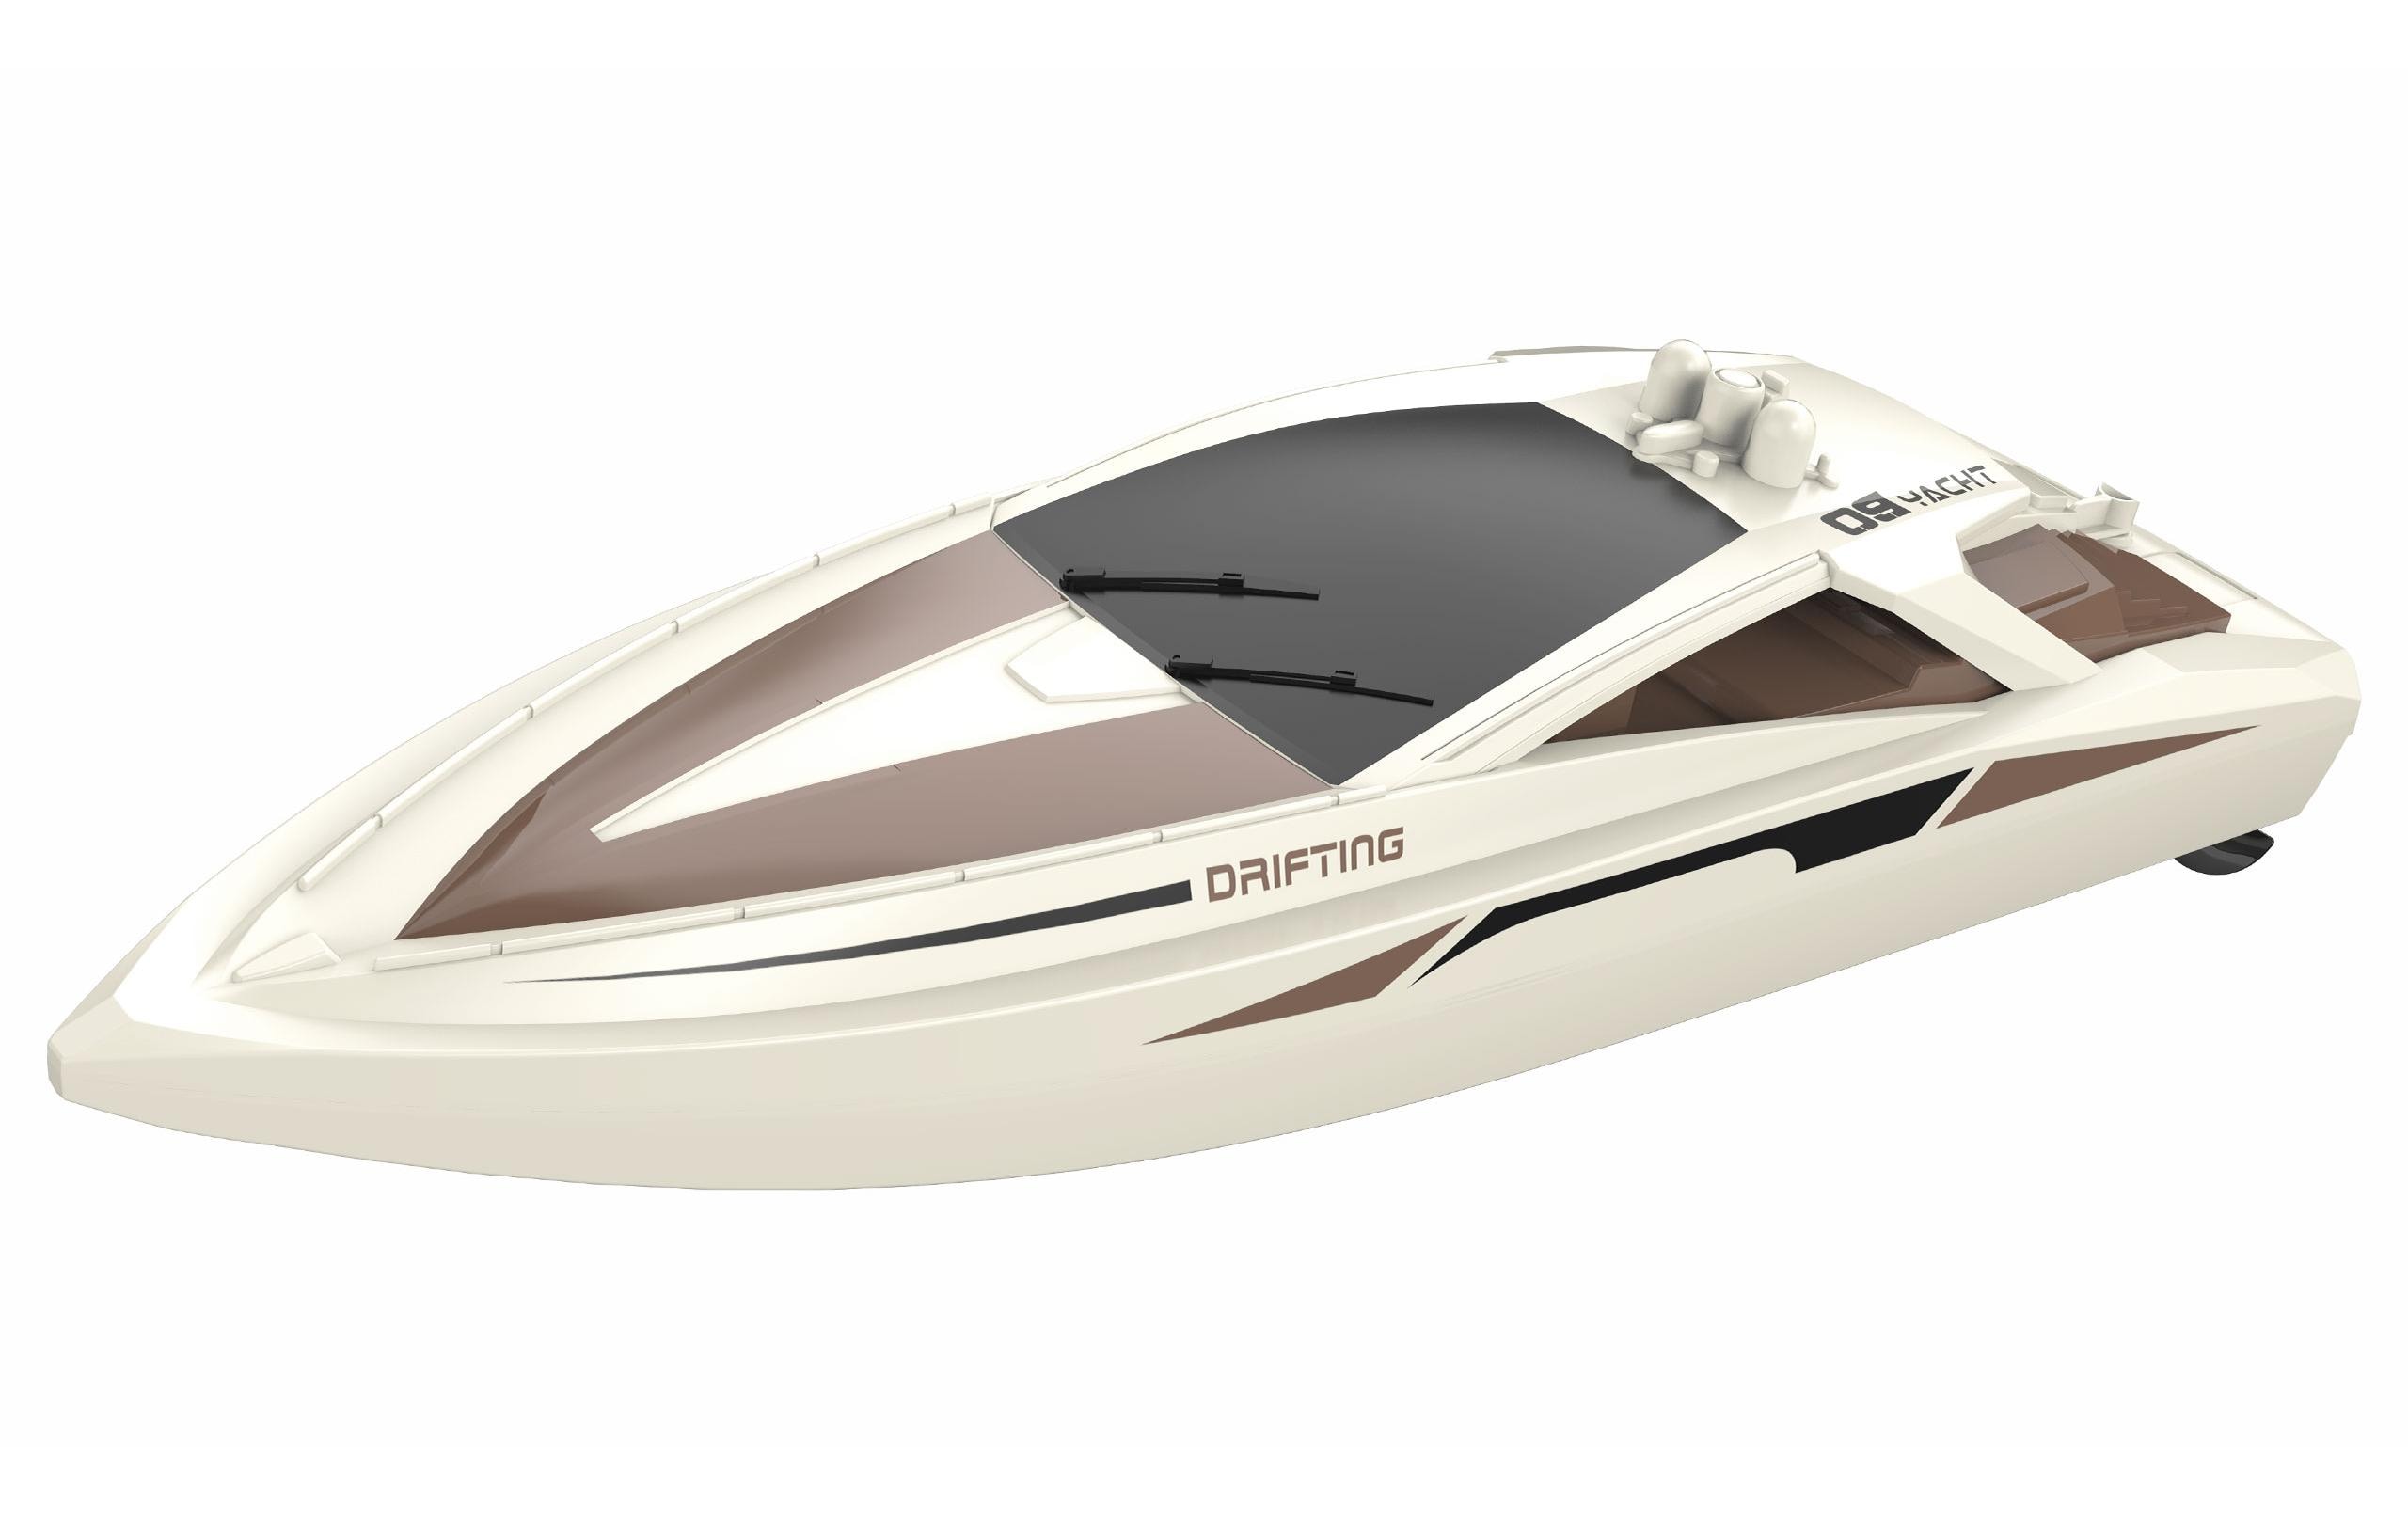 Amewi Yacht Caprice, 380 mm RTR